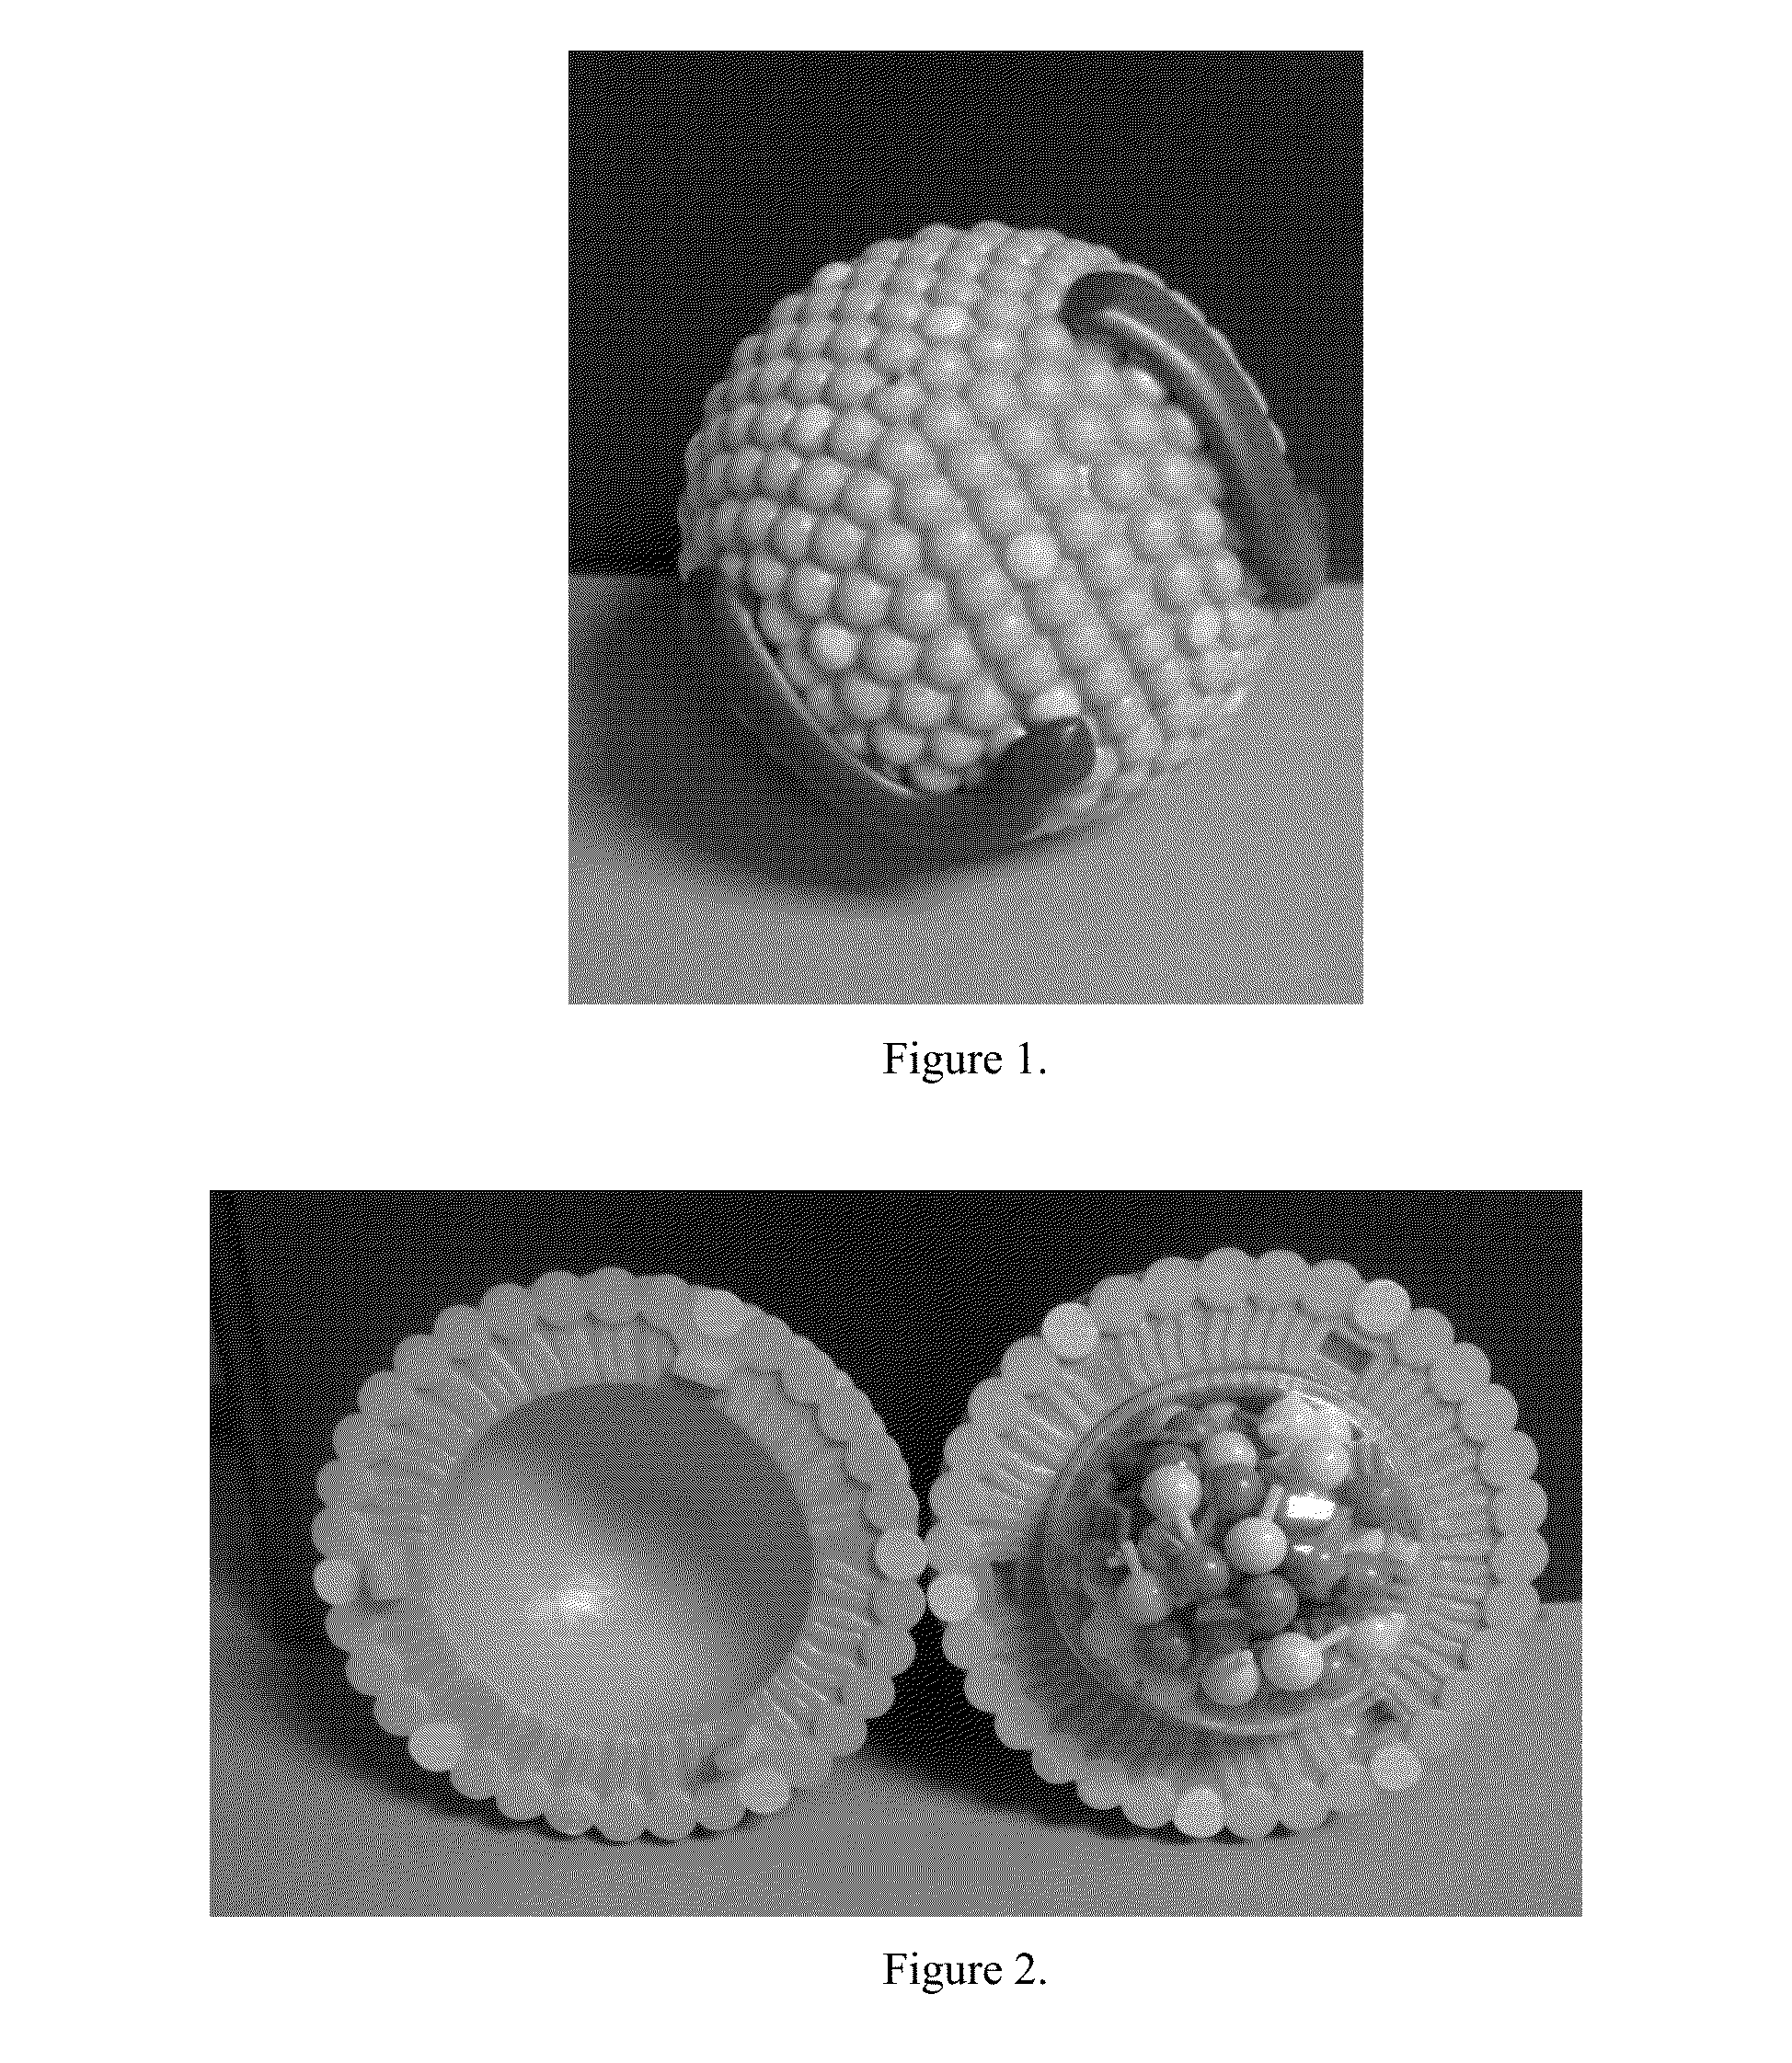 System and method for assessing quanitites or sizes of lipoprotein particles from lipoprotein particle compositions